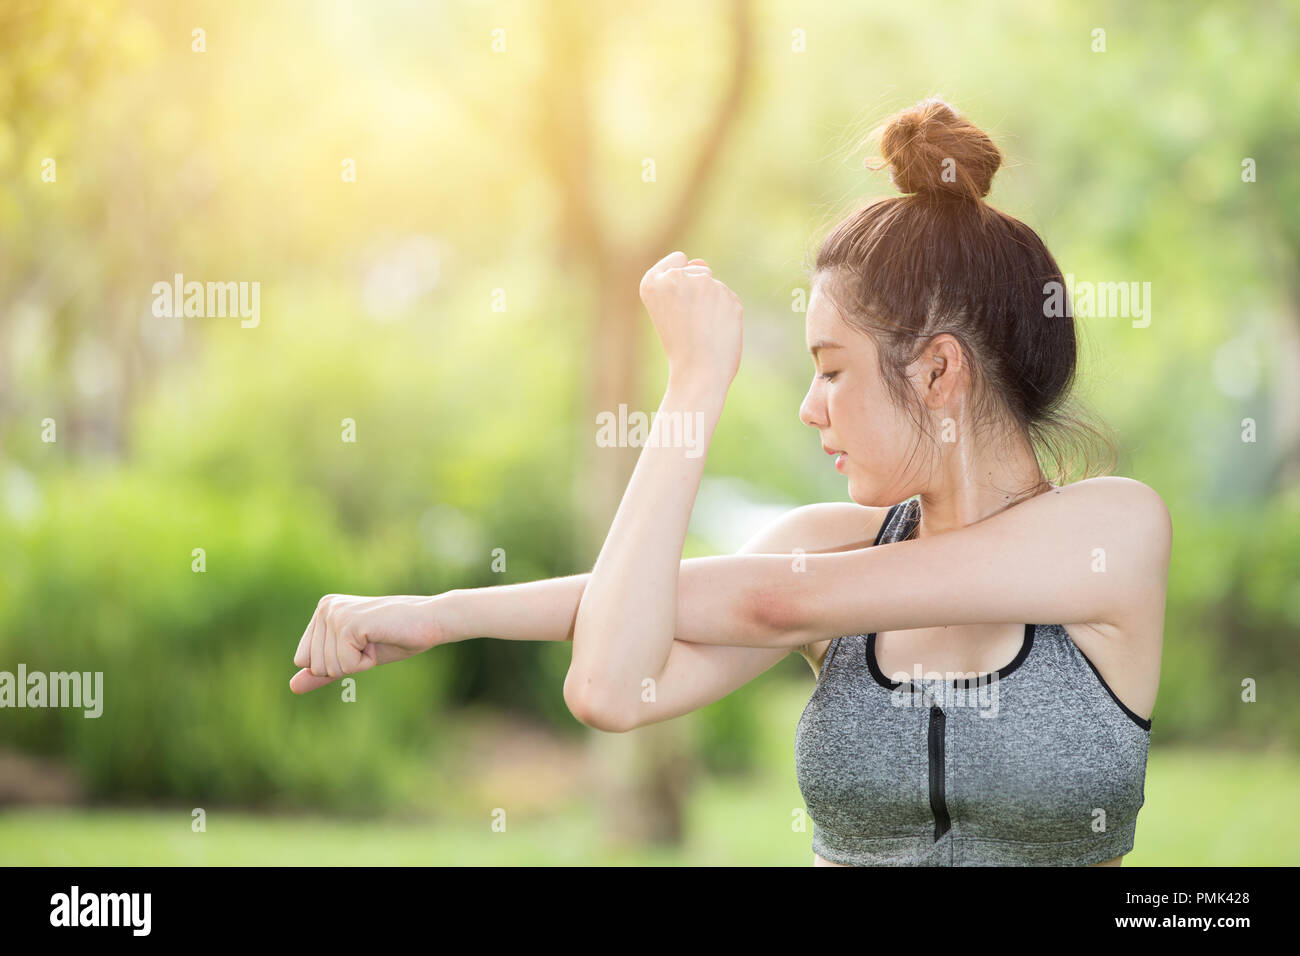 Cute young teen arm stretching beautiful girl in the park outdoor exercise Stock Photo